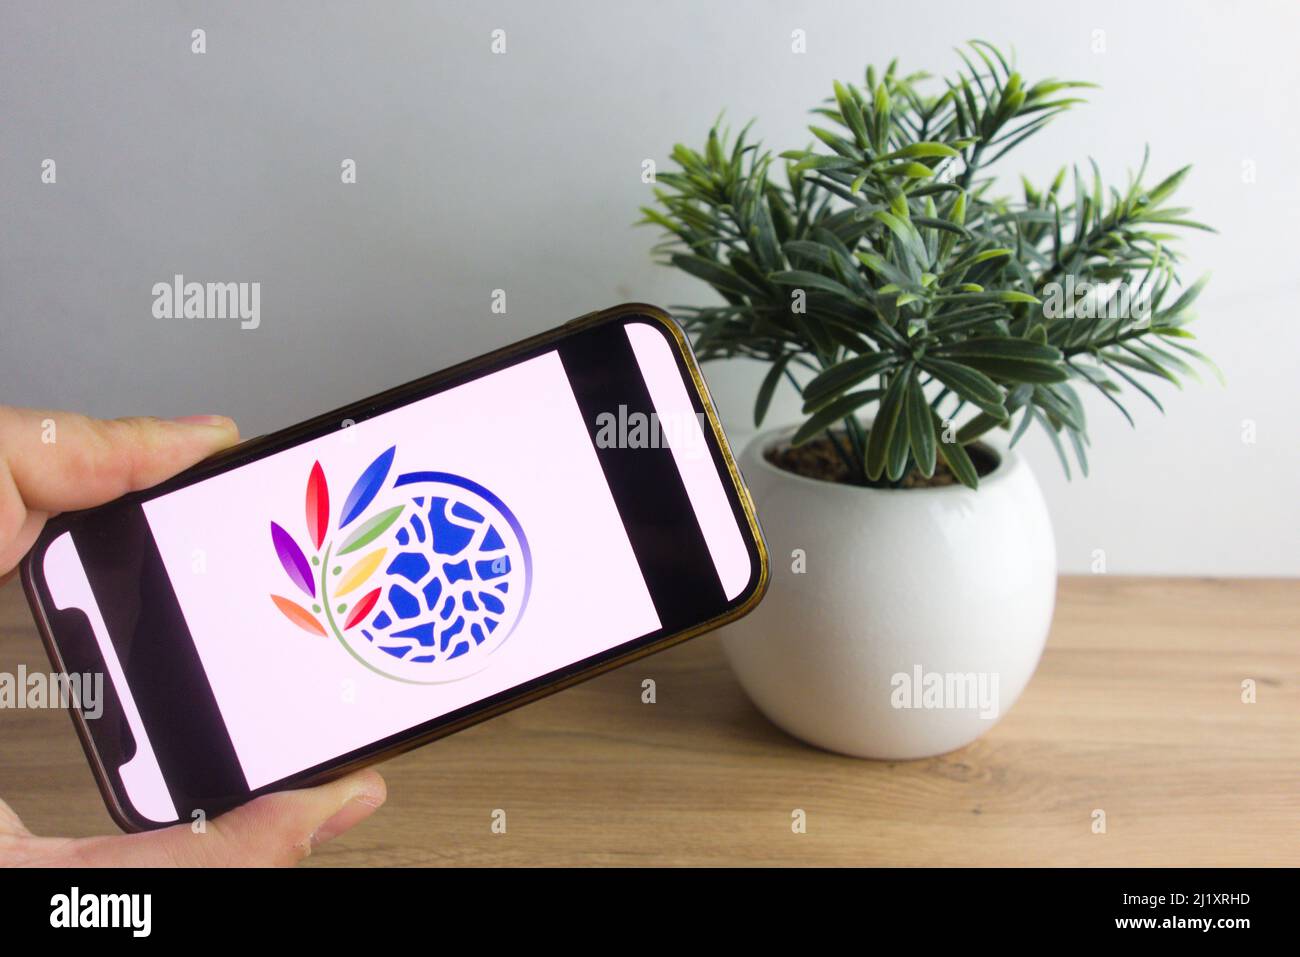 KONSKIE, POLAND - March 26, 2022: IUCN World Conservation Congress logo displayed on mobile phone Stock Photo